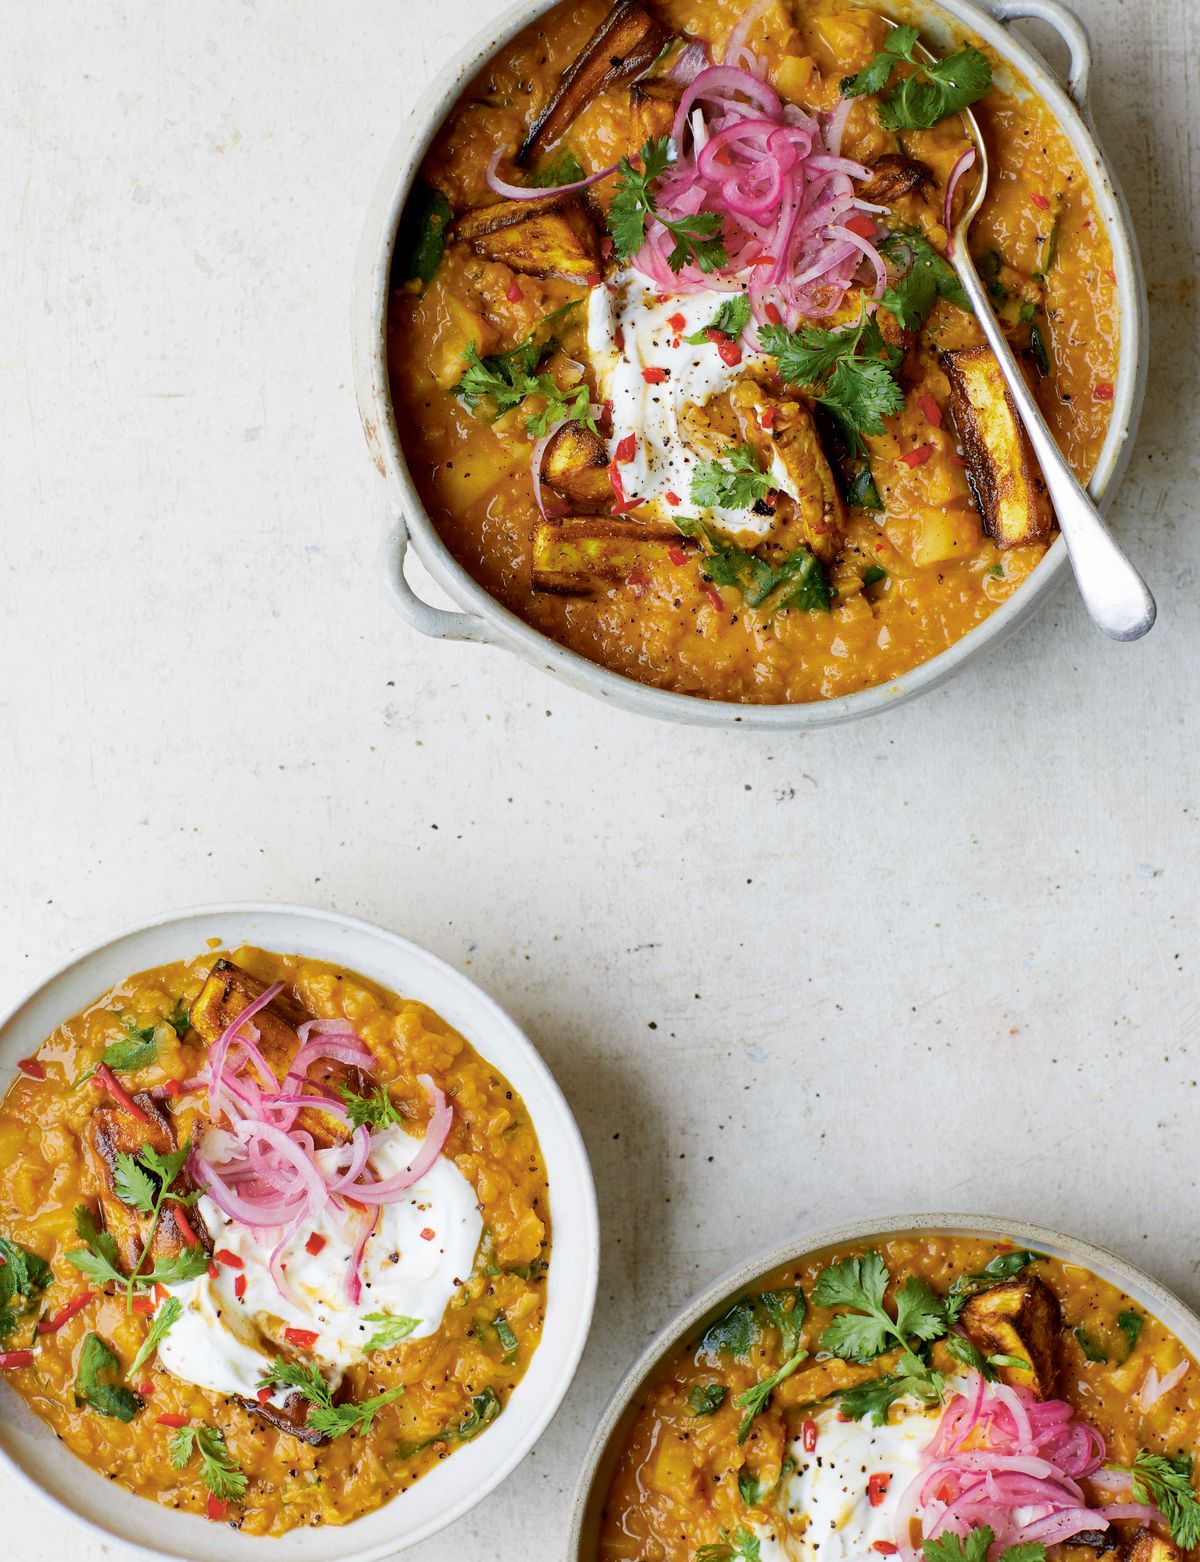 Melissa Hemsley’s Parsnip Dahl Topped with Roasted Parsnips and Pink Pickled Onions